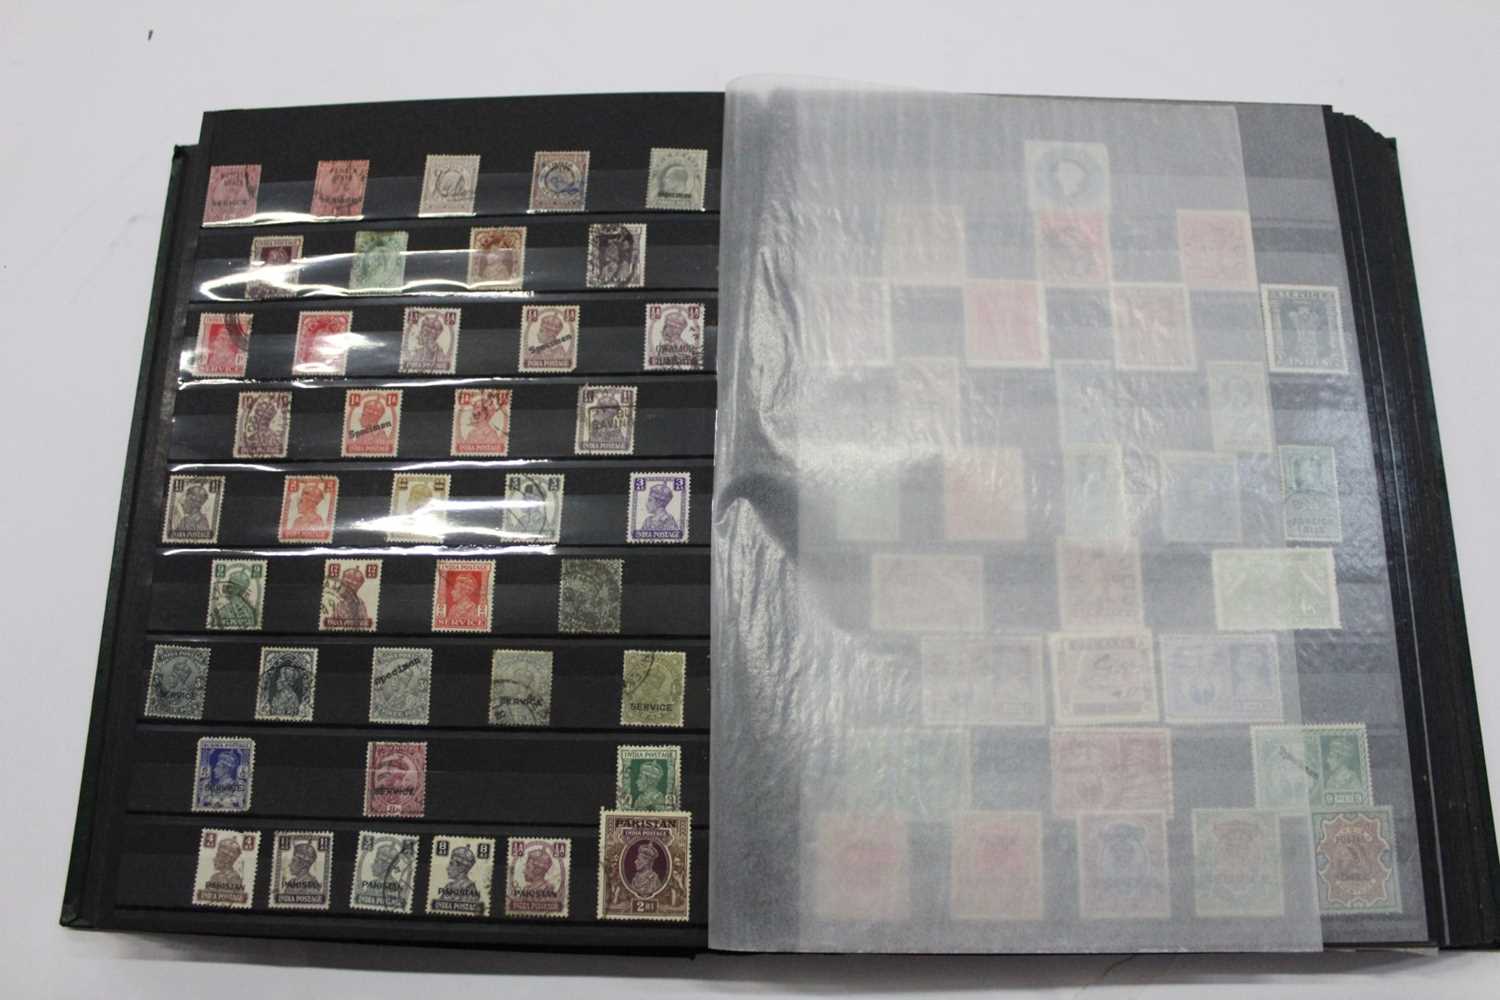 Stamps Royal Navy collection of stamp covers in album, 100 Years of Flight World War II coin covers, - Image 19 of 20